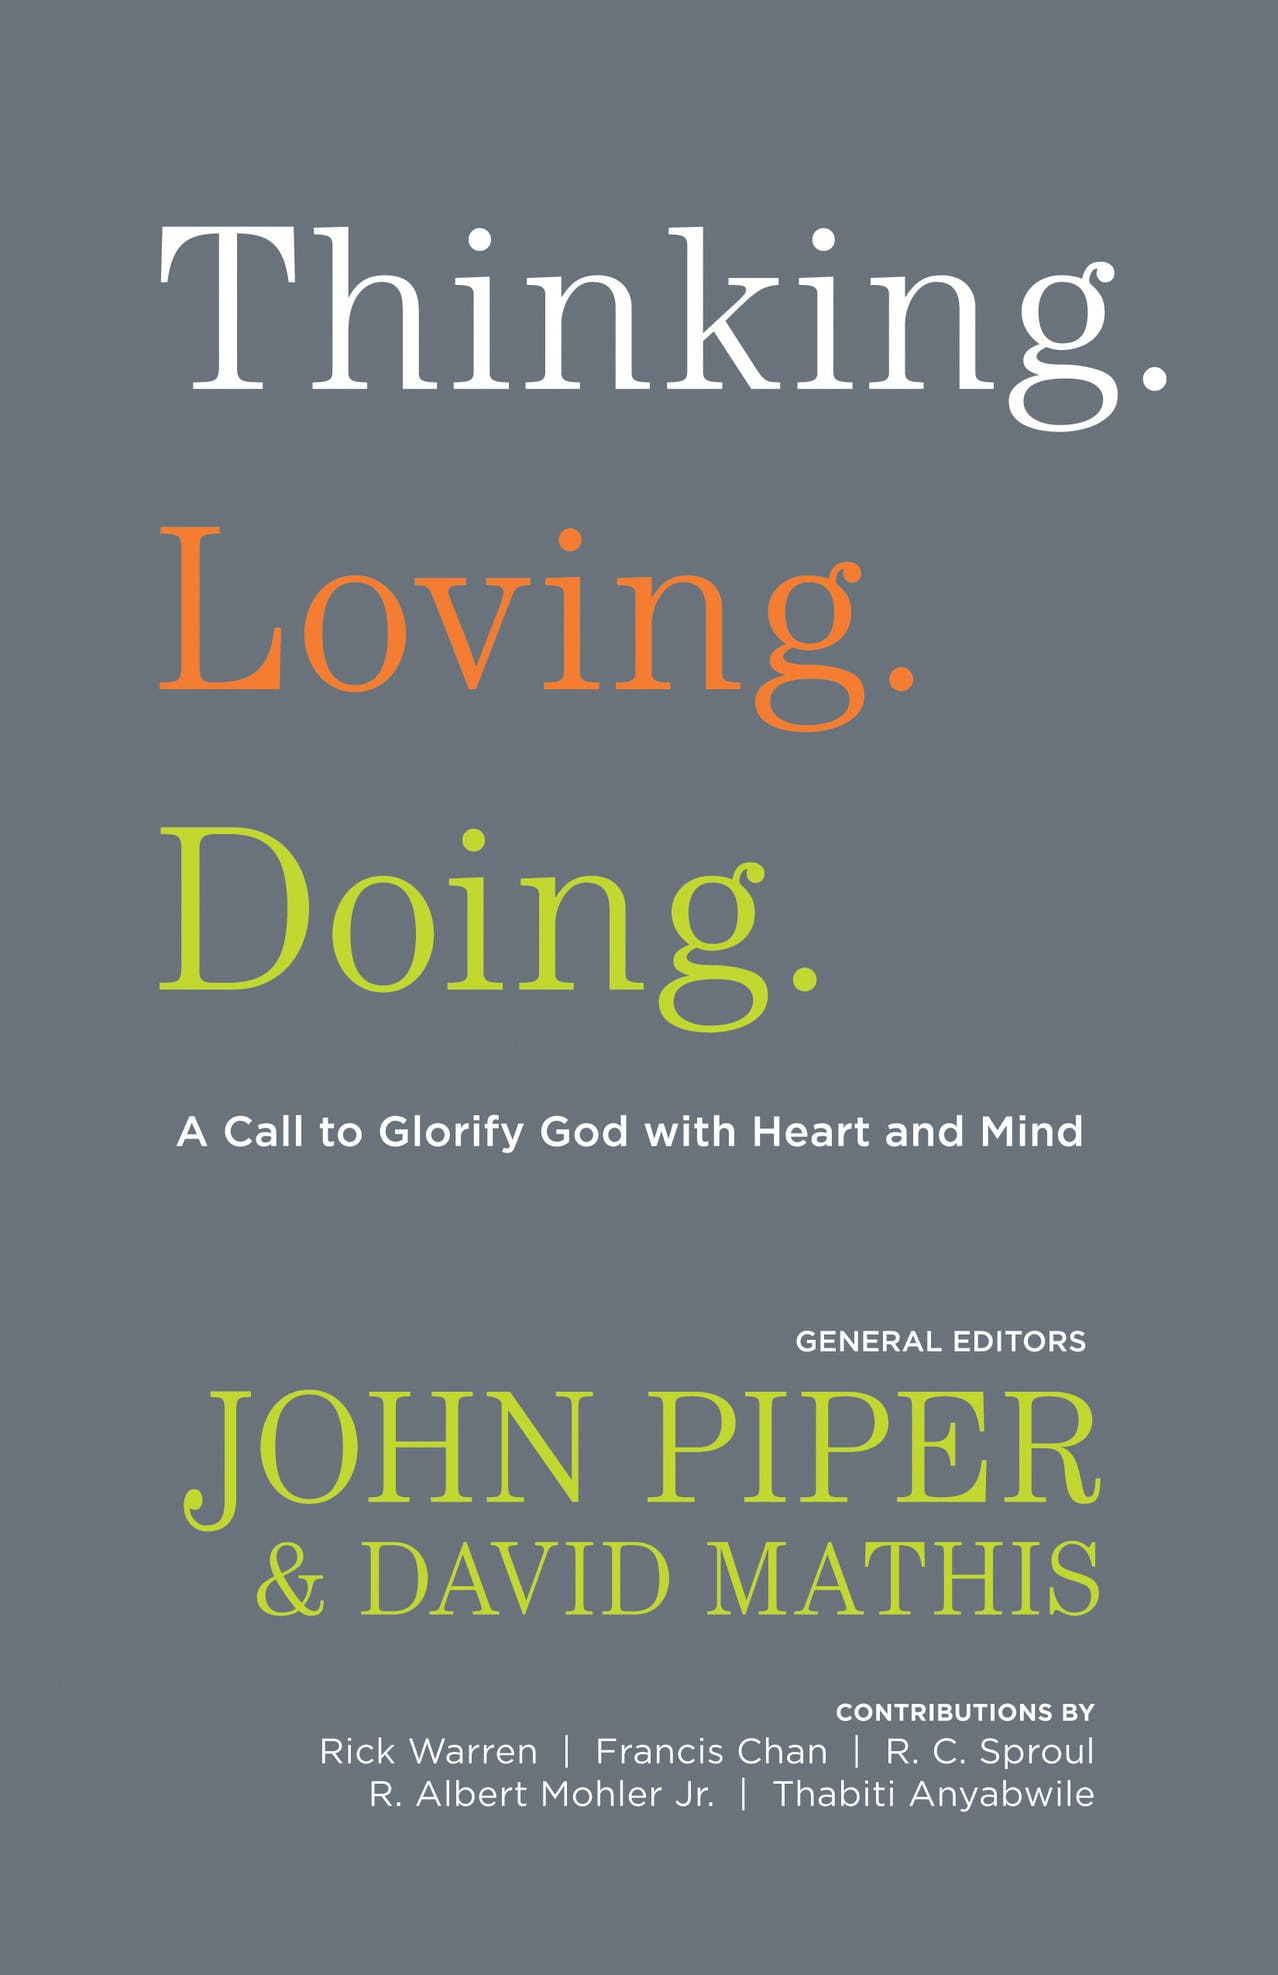 DOWNLOAD PDF: Thinking, Loving, Doing by John Piper 22